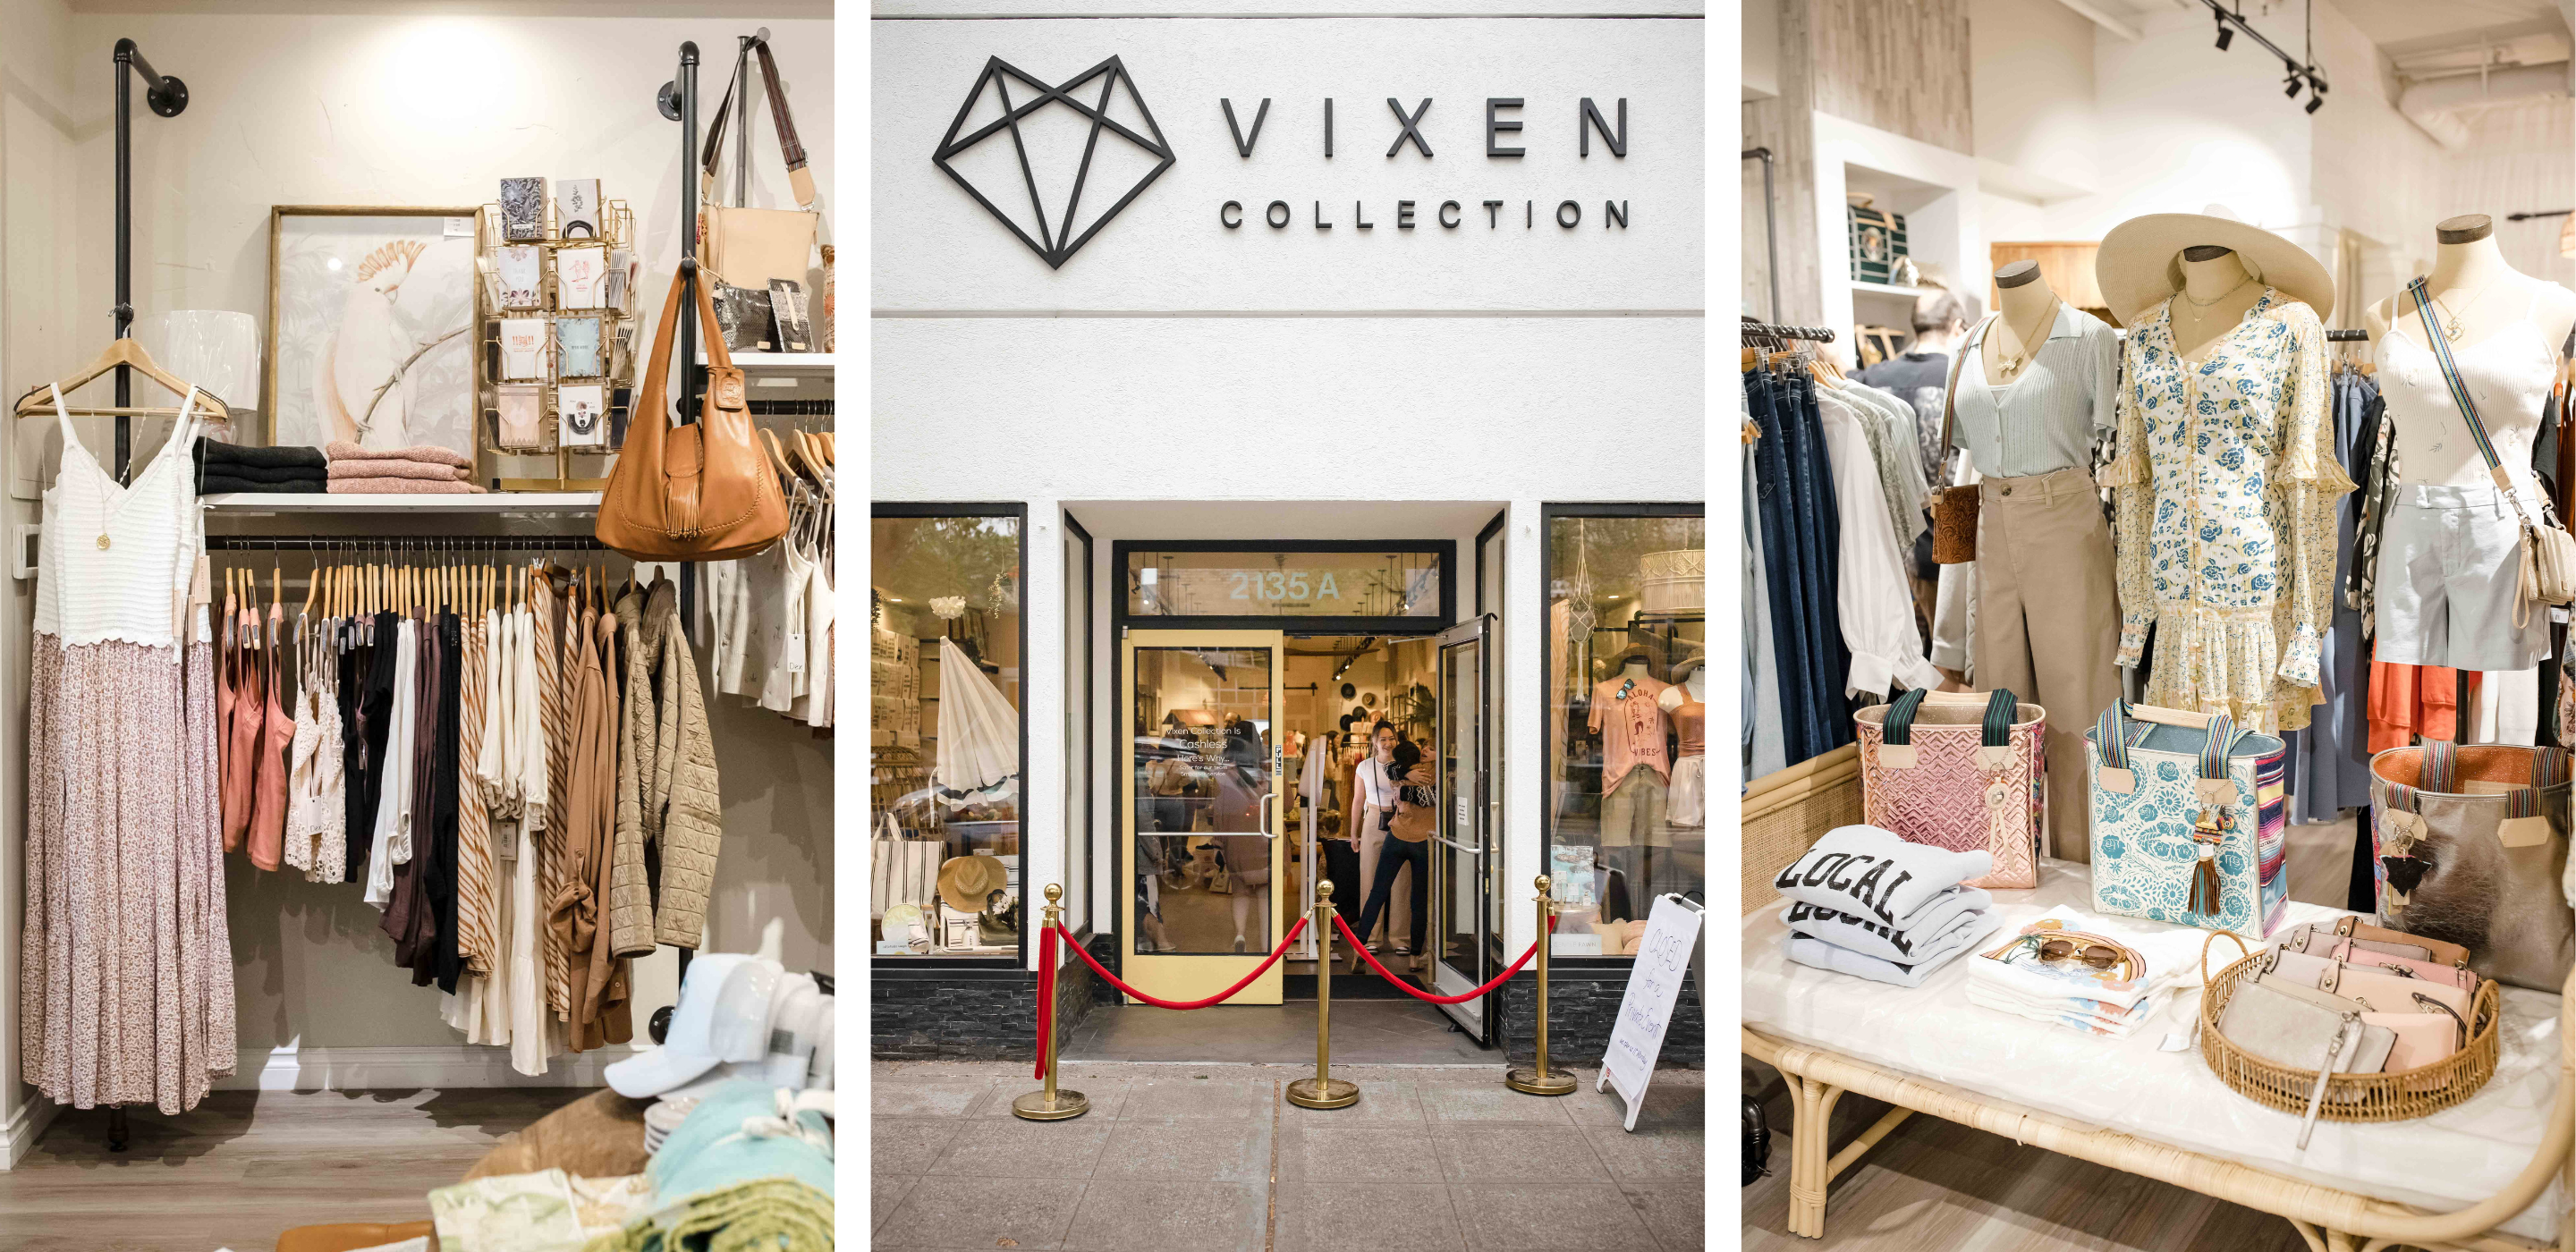 Image of Vixen Collection Storefront in Seattle, WA